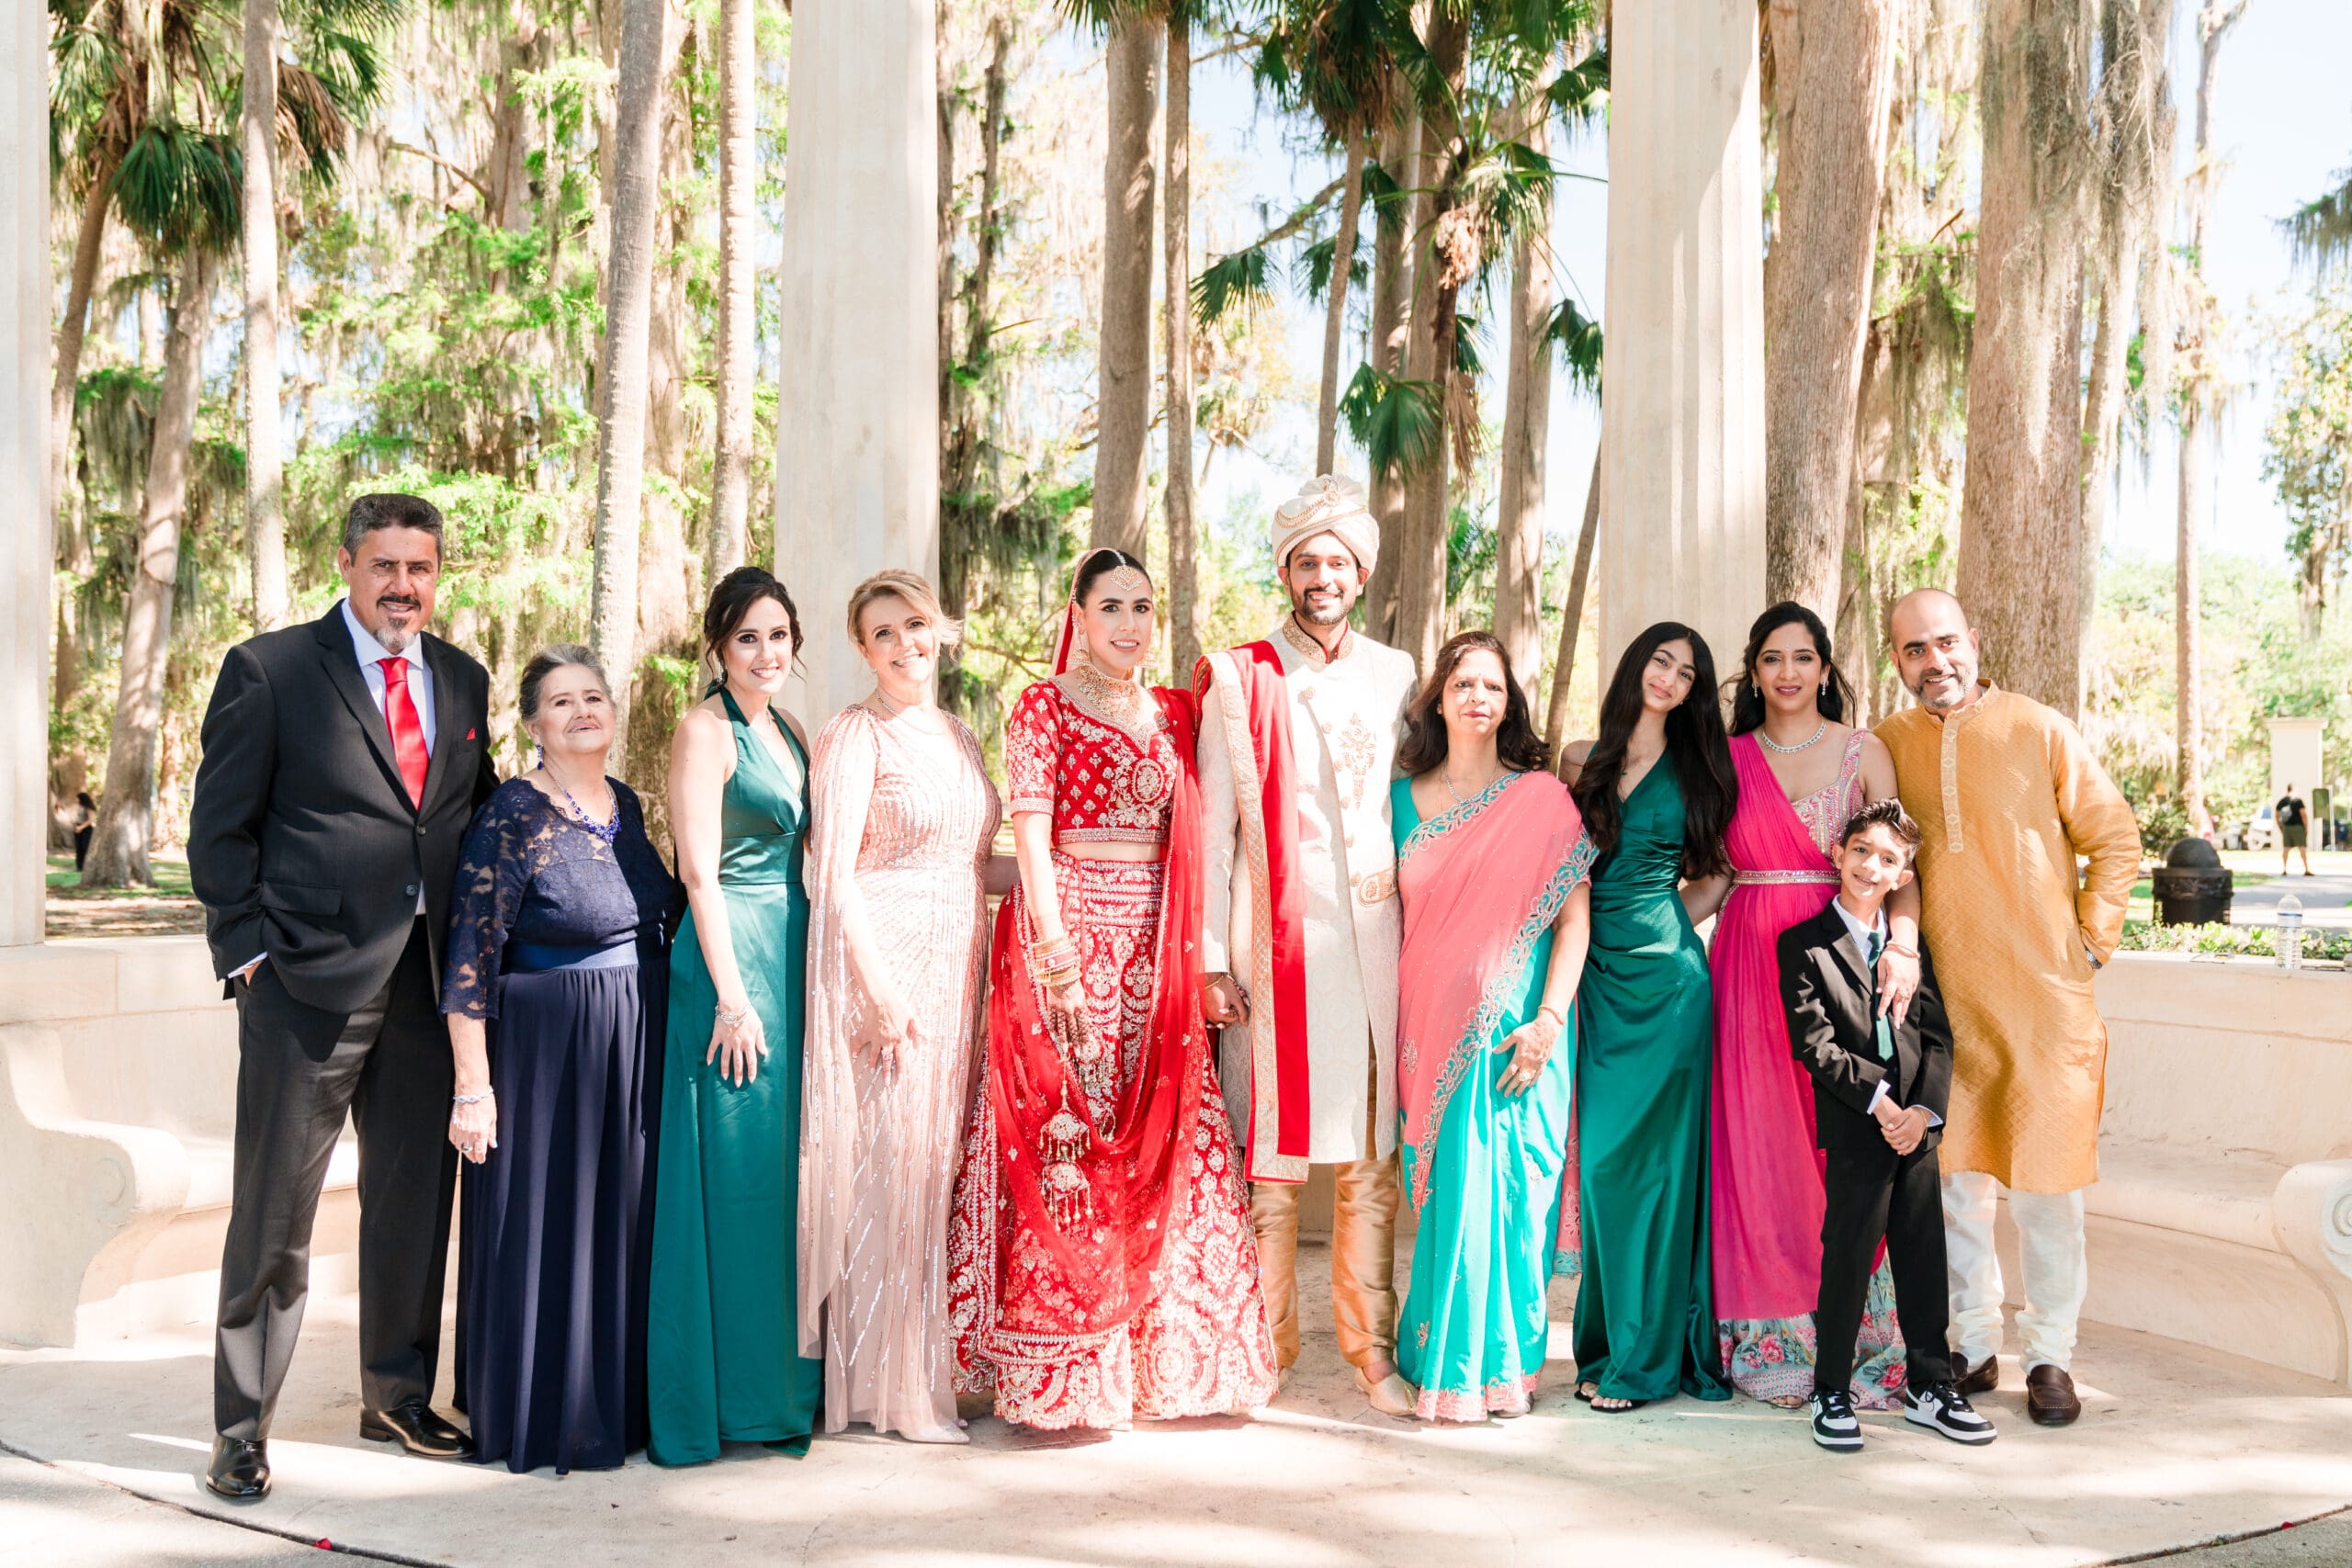 Sabrina and Rahul, flanked by their families, pose in traditional Indian wedding attire alongside bridesmaids and groomsmen, at Kraft Azalea Gardens.